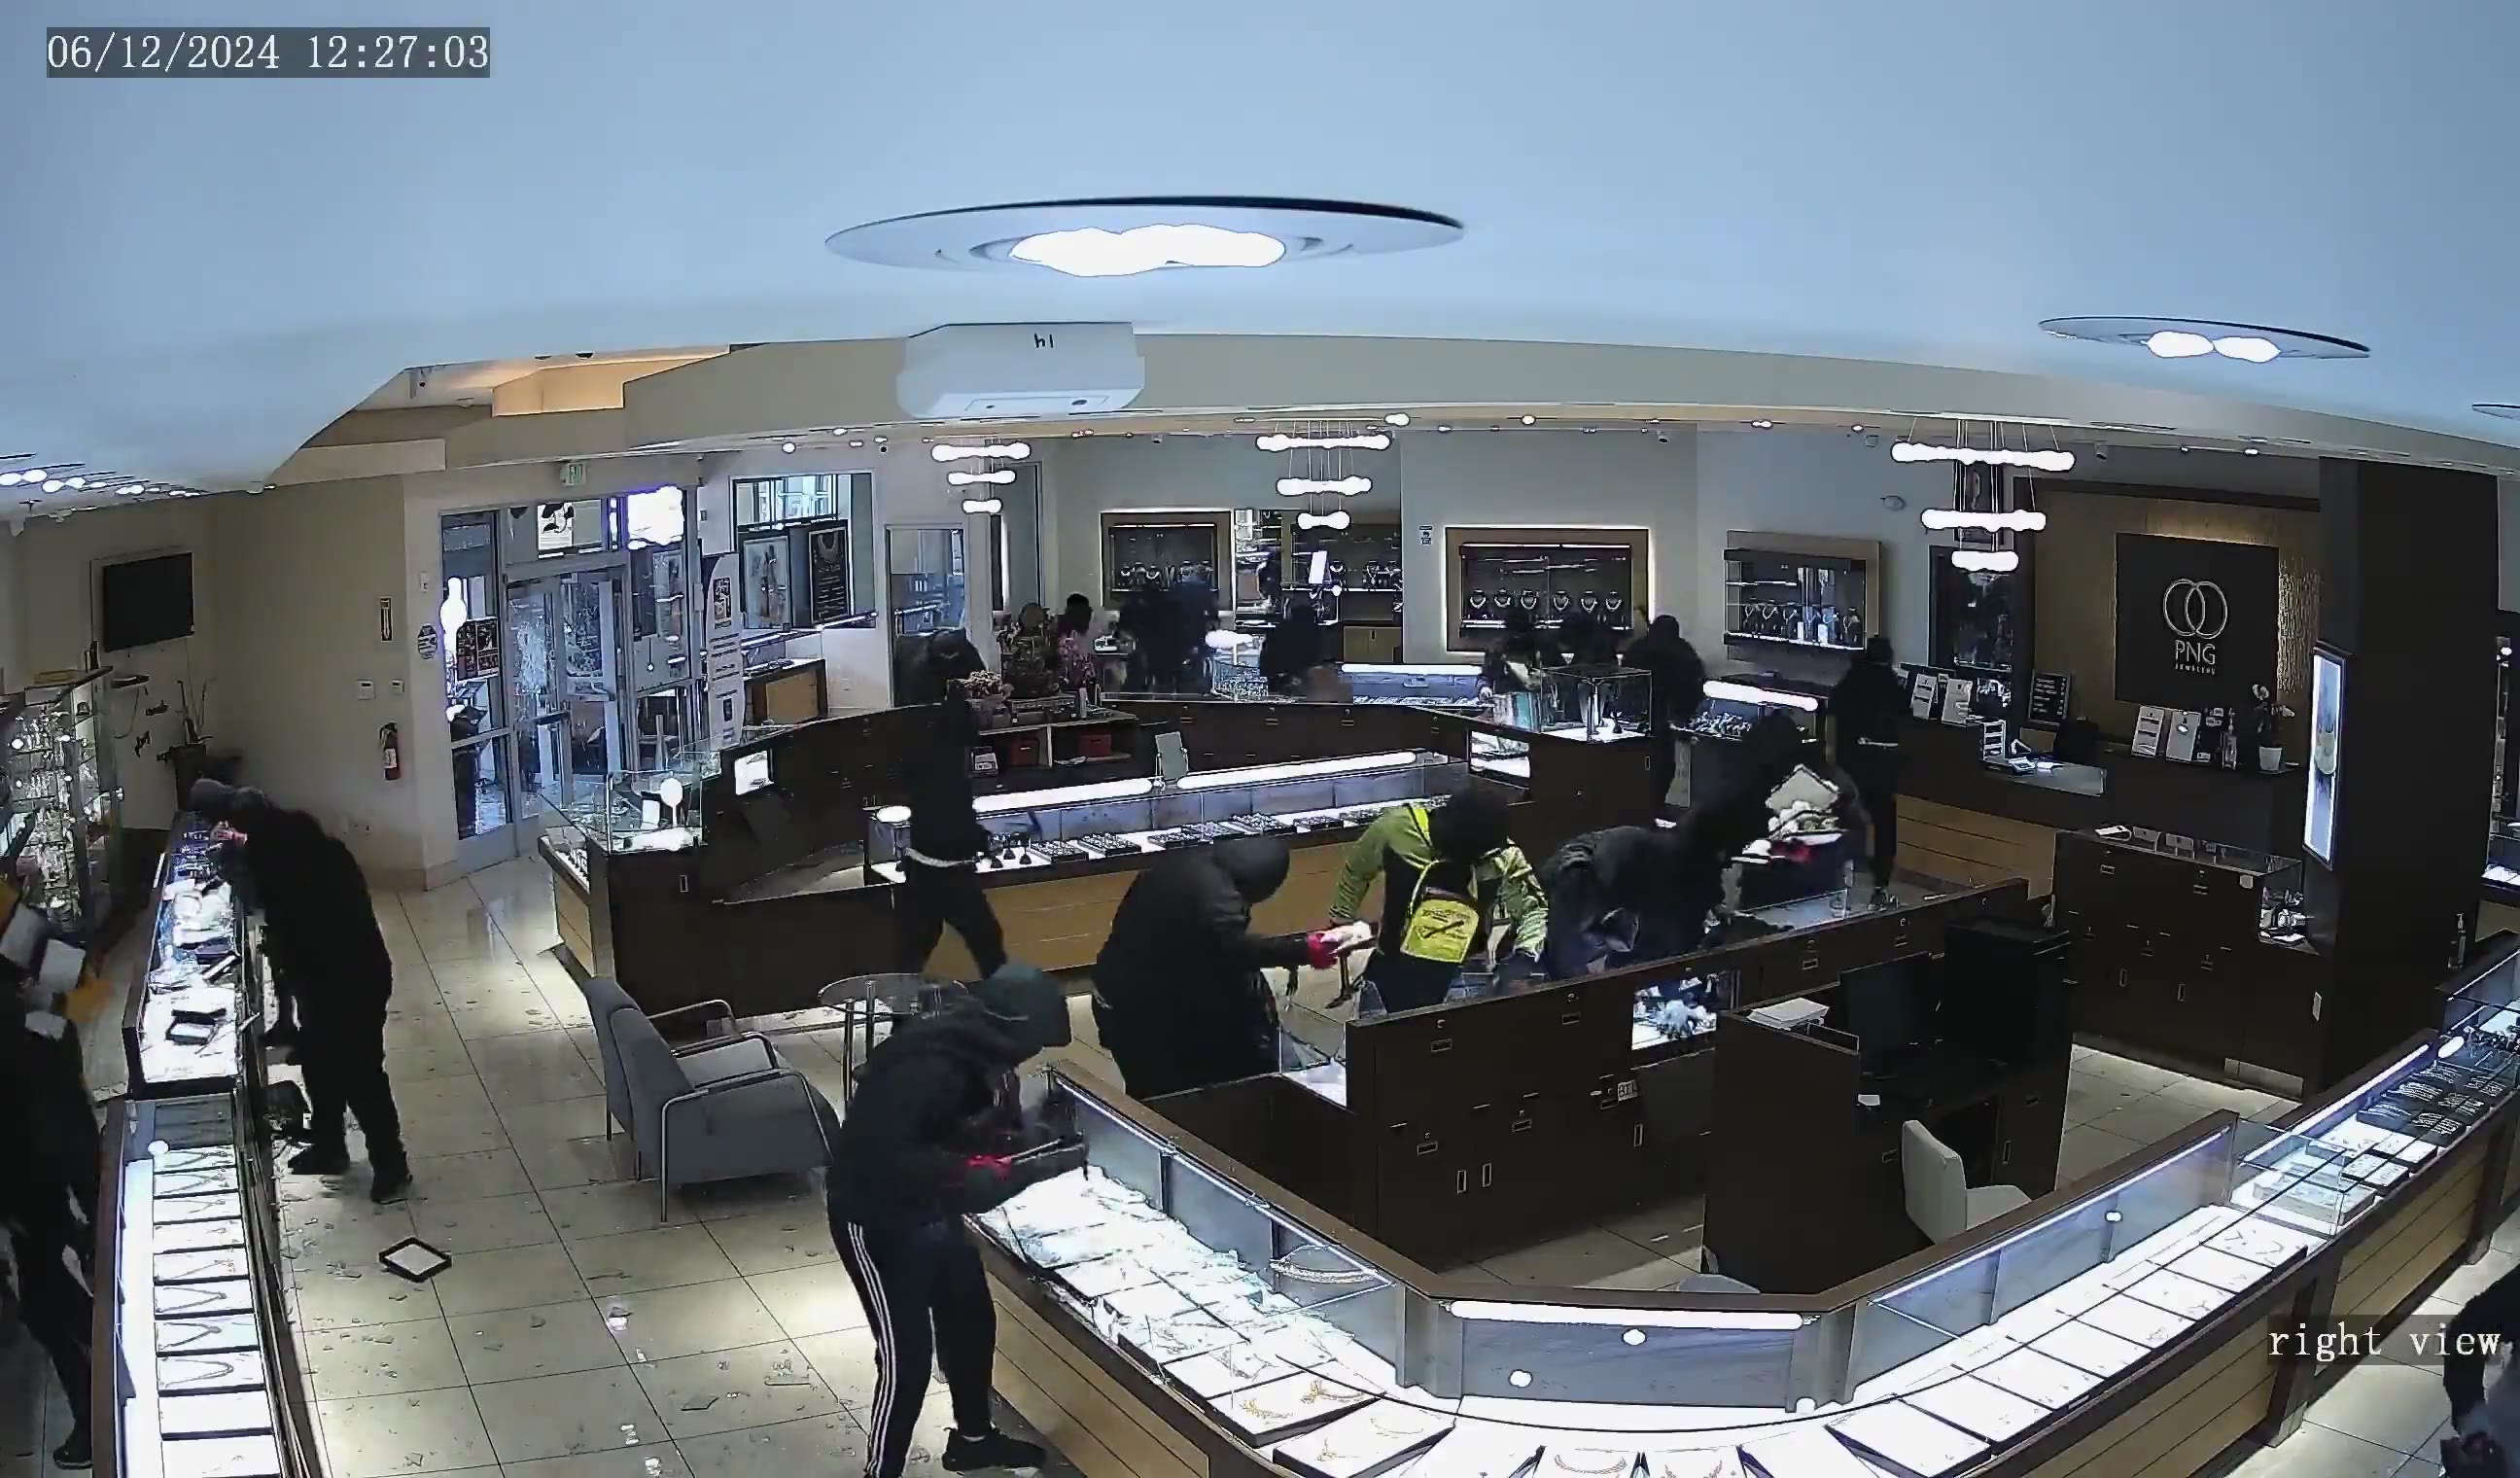 Jewelry store overwhelmed in shocking Bay Area smash & grab robbery